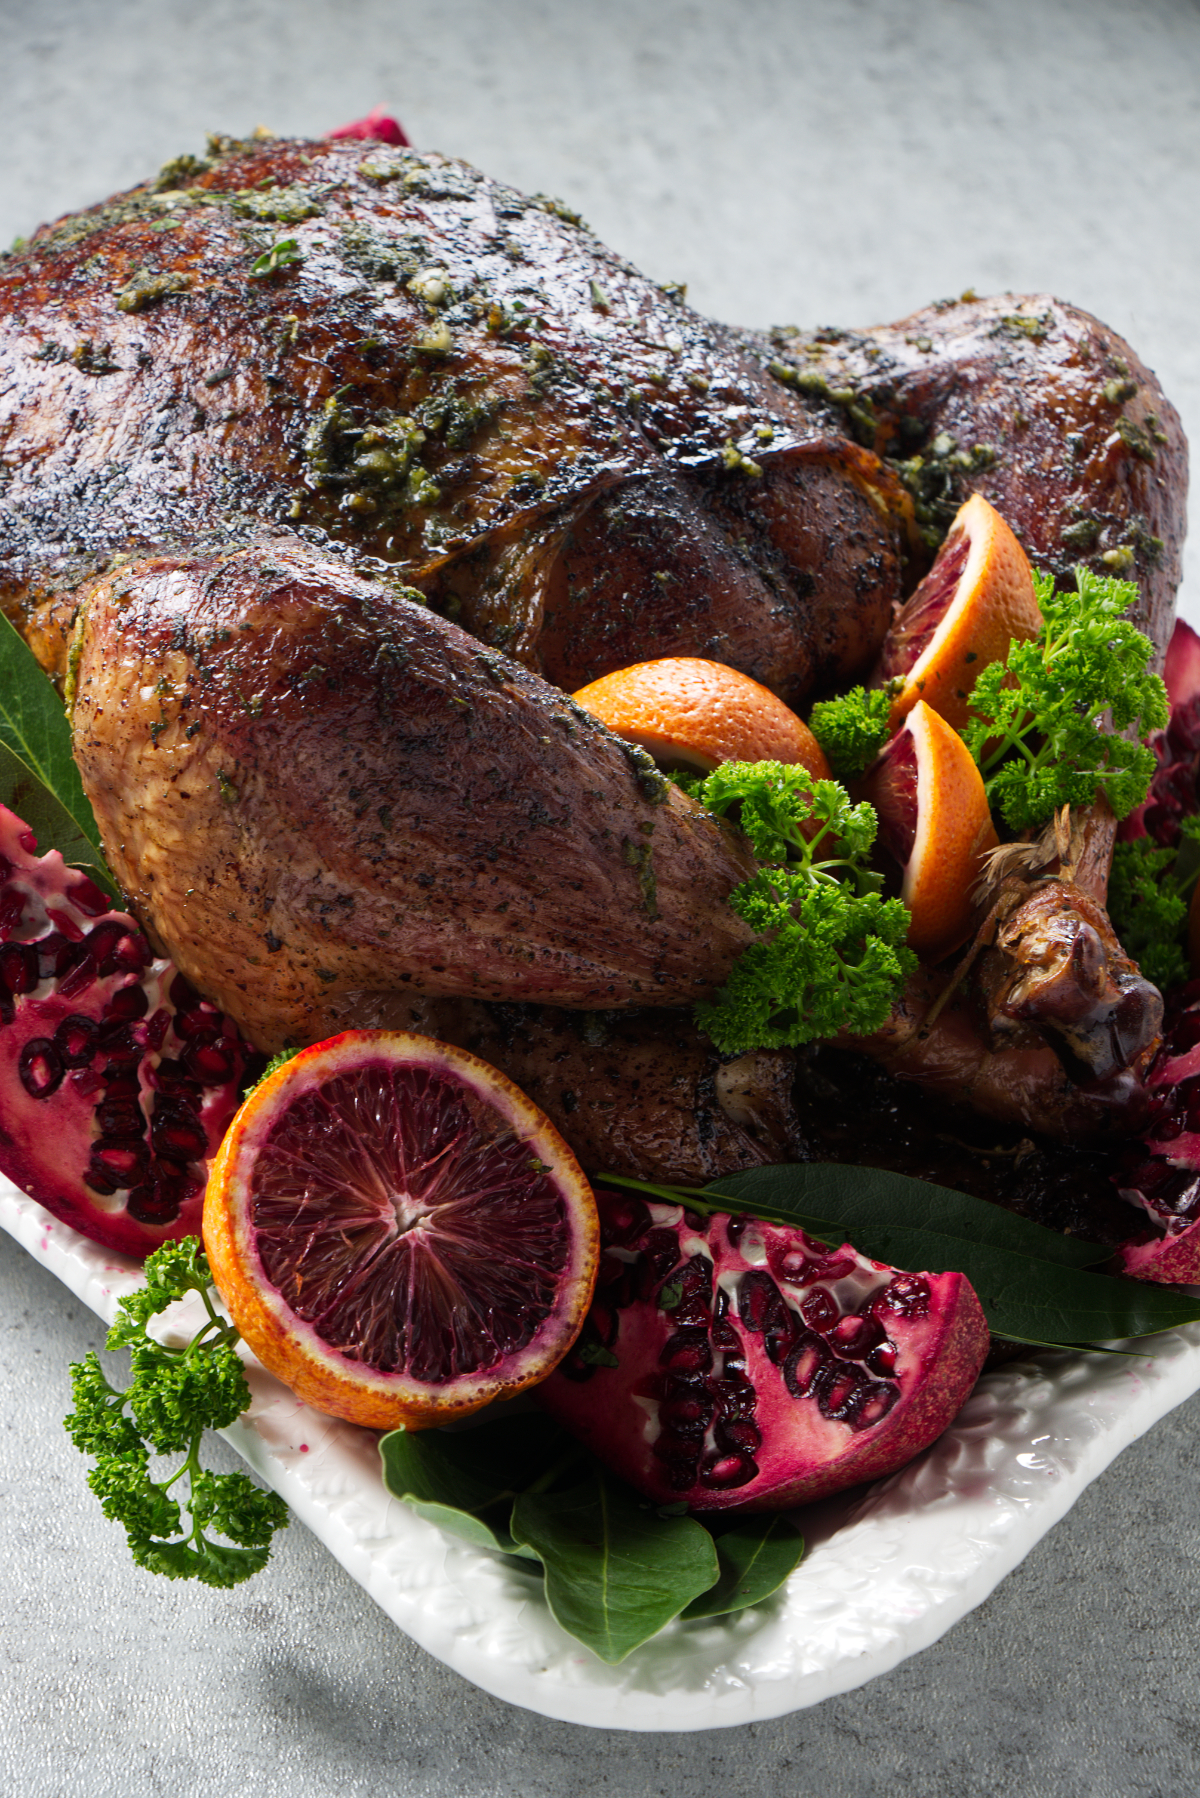 Whole dry brine smoked turkey on a platter arranged with citrus, pomegranate, and herbs as garnish.